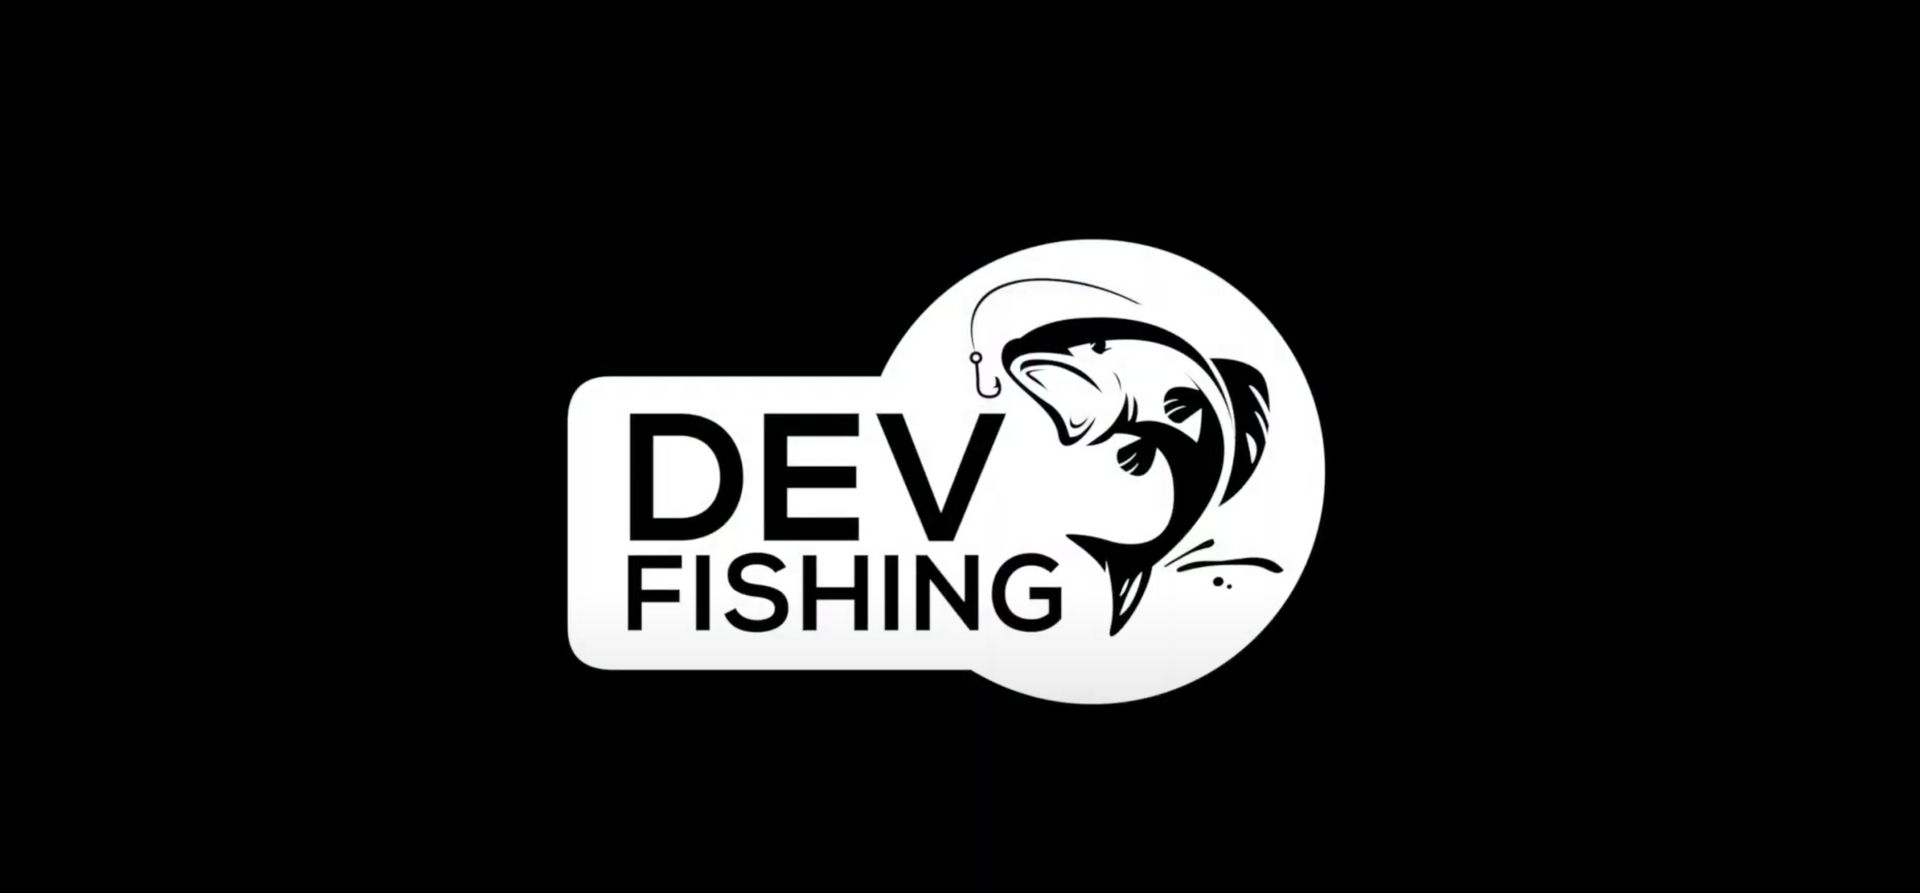 Load video: Dev Fishing Lifestyle Video Showcasing various products